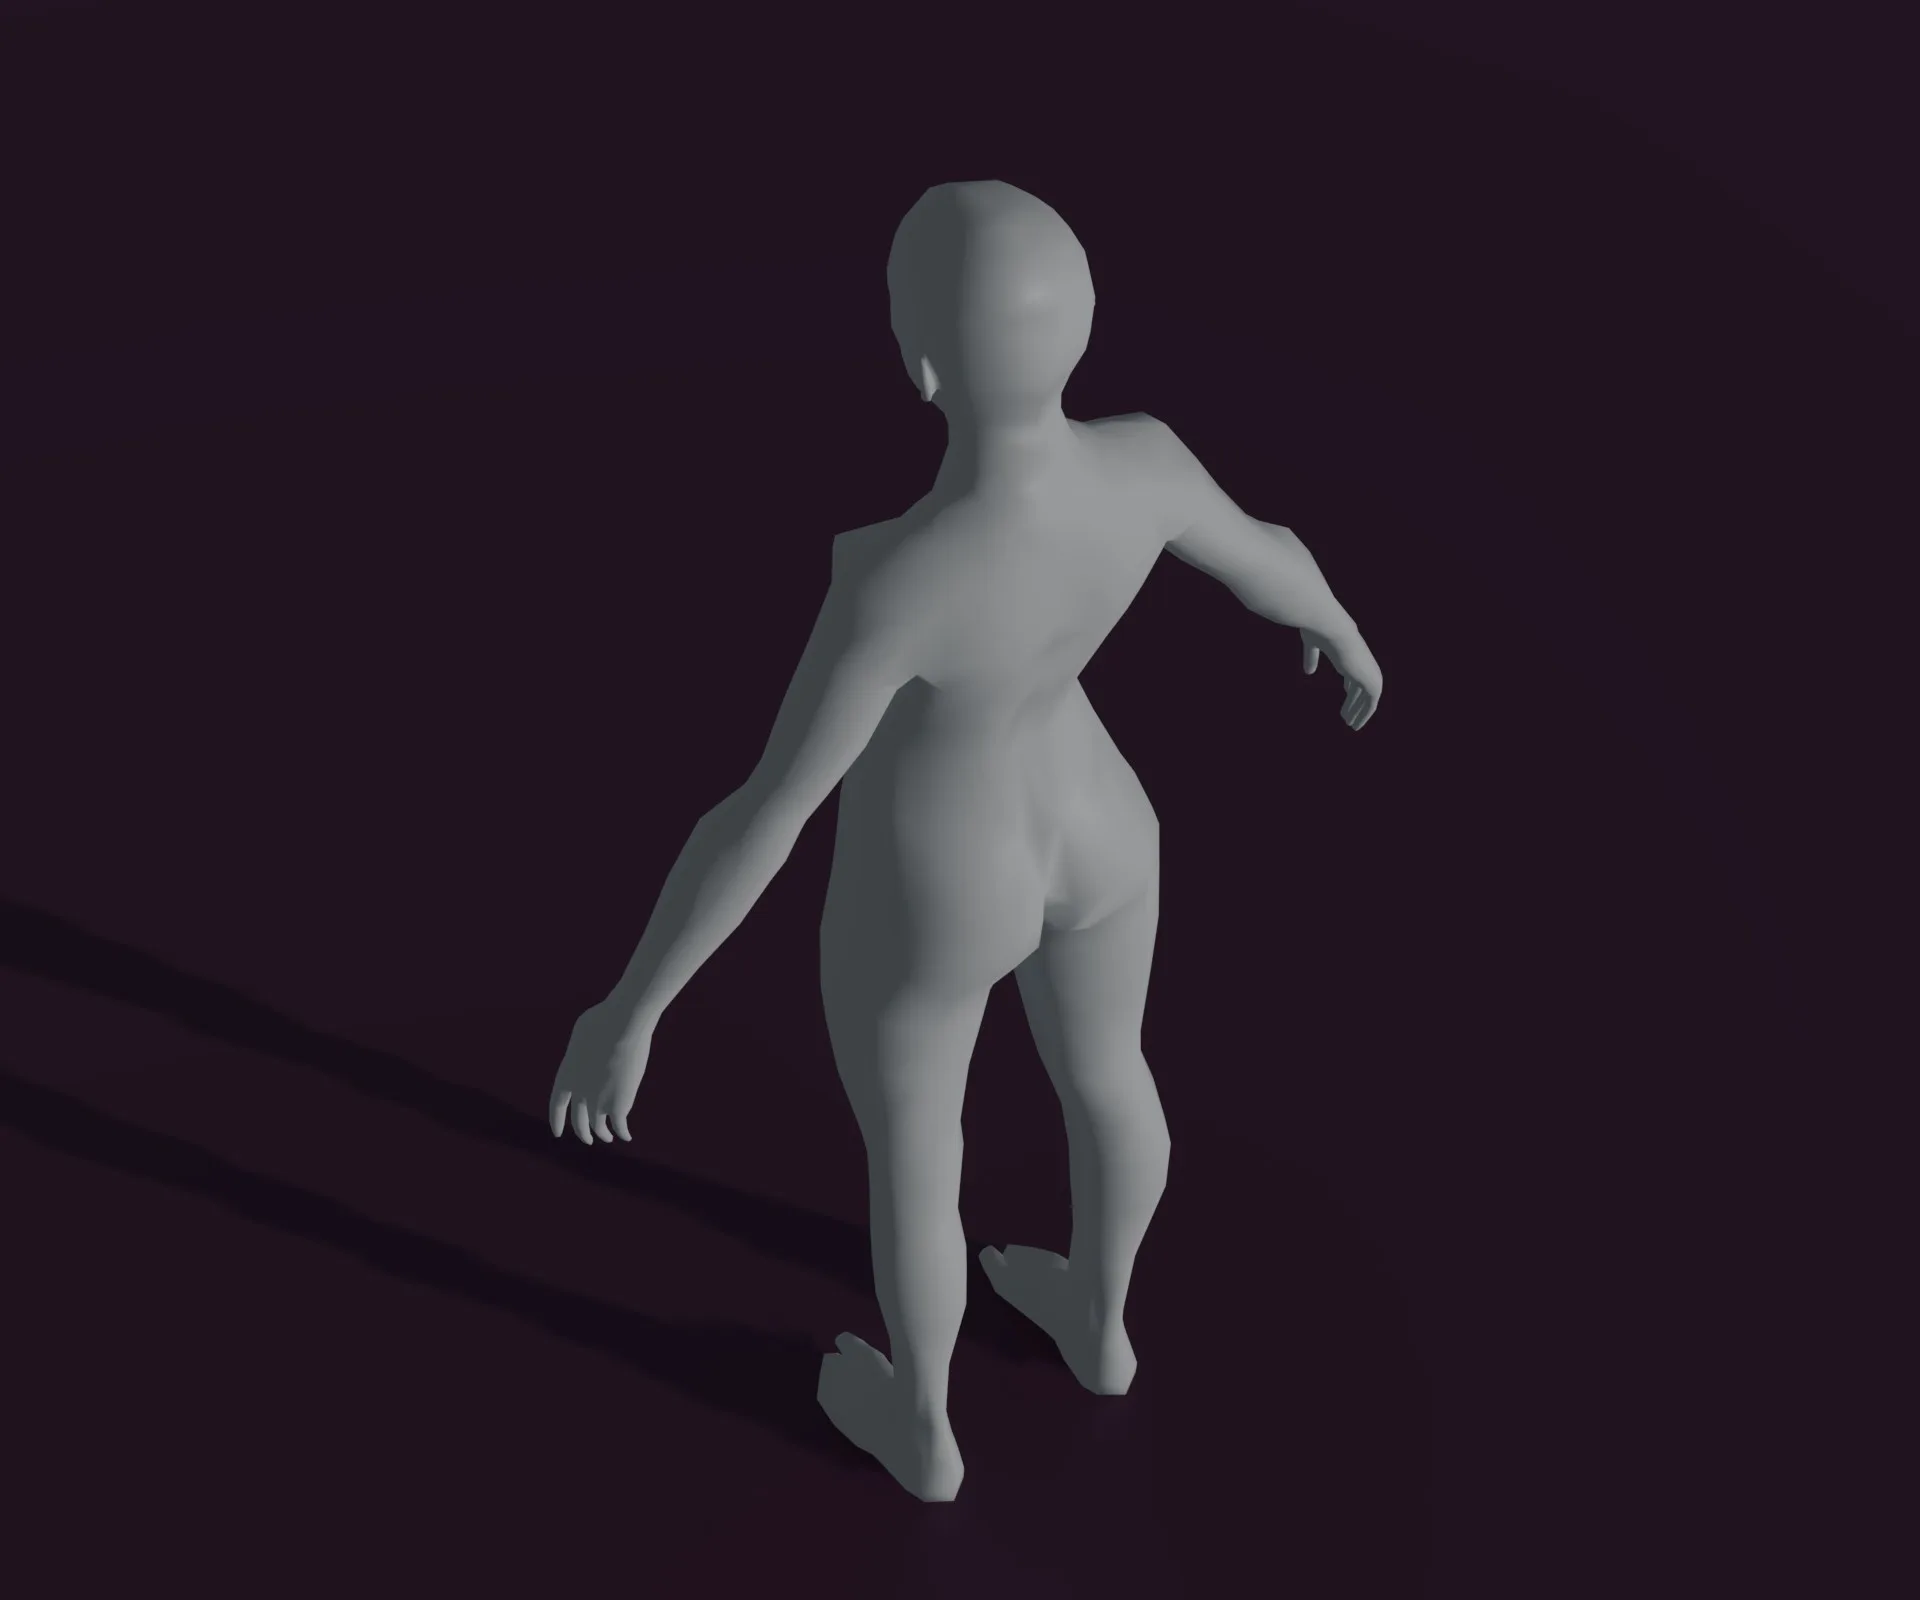 Female Body Base Mesh Animated and Rigged 3D Model